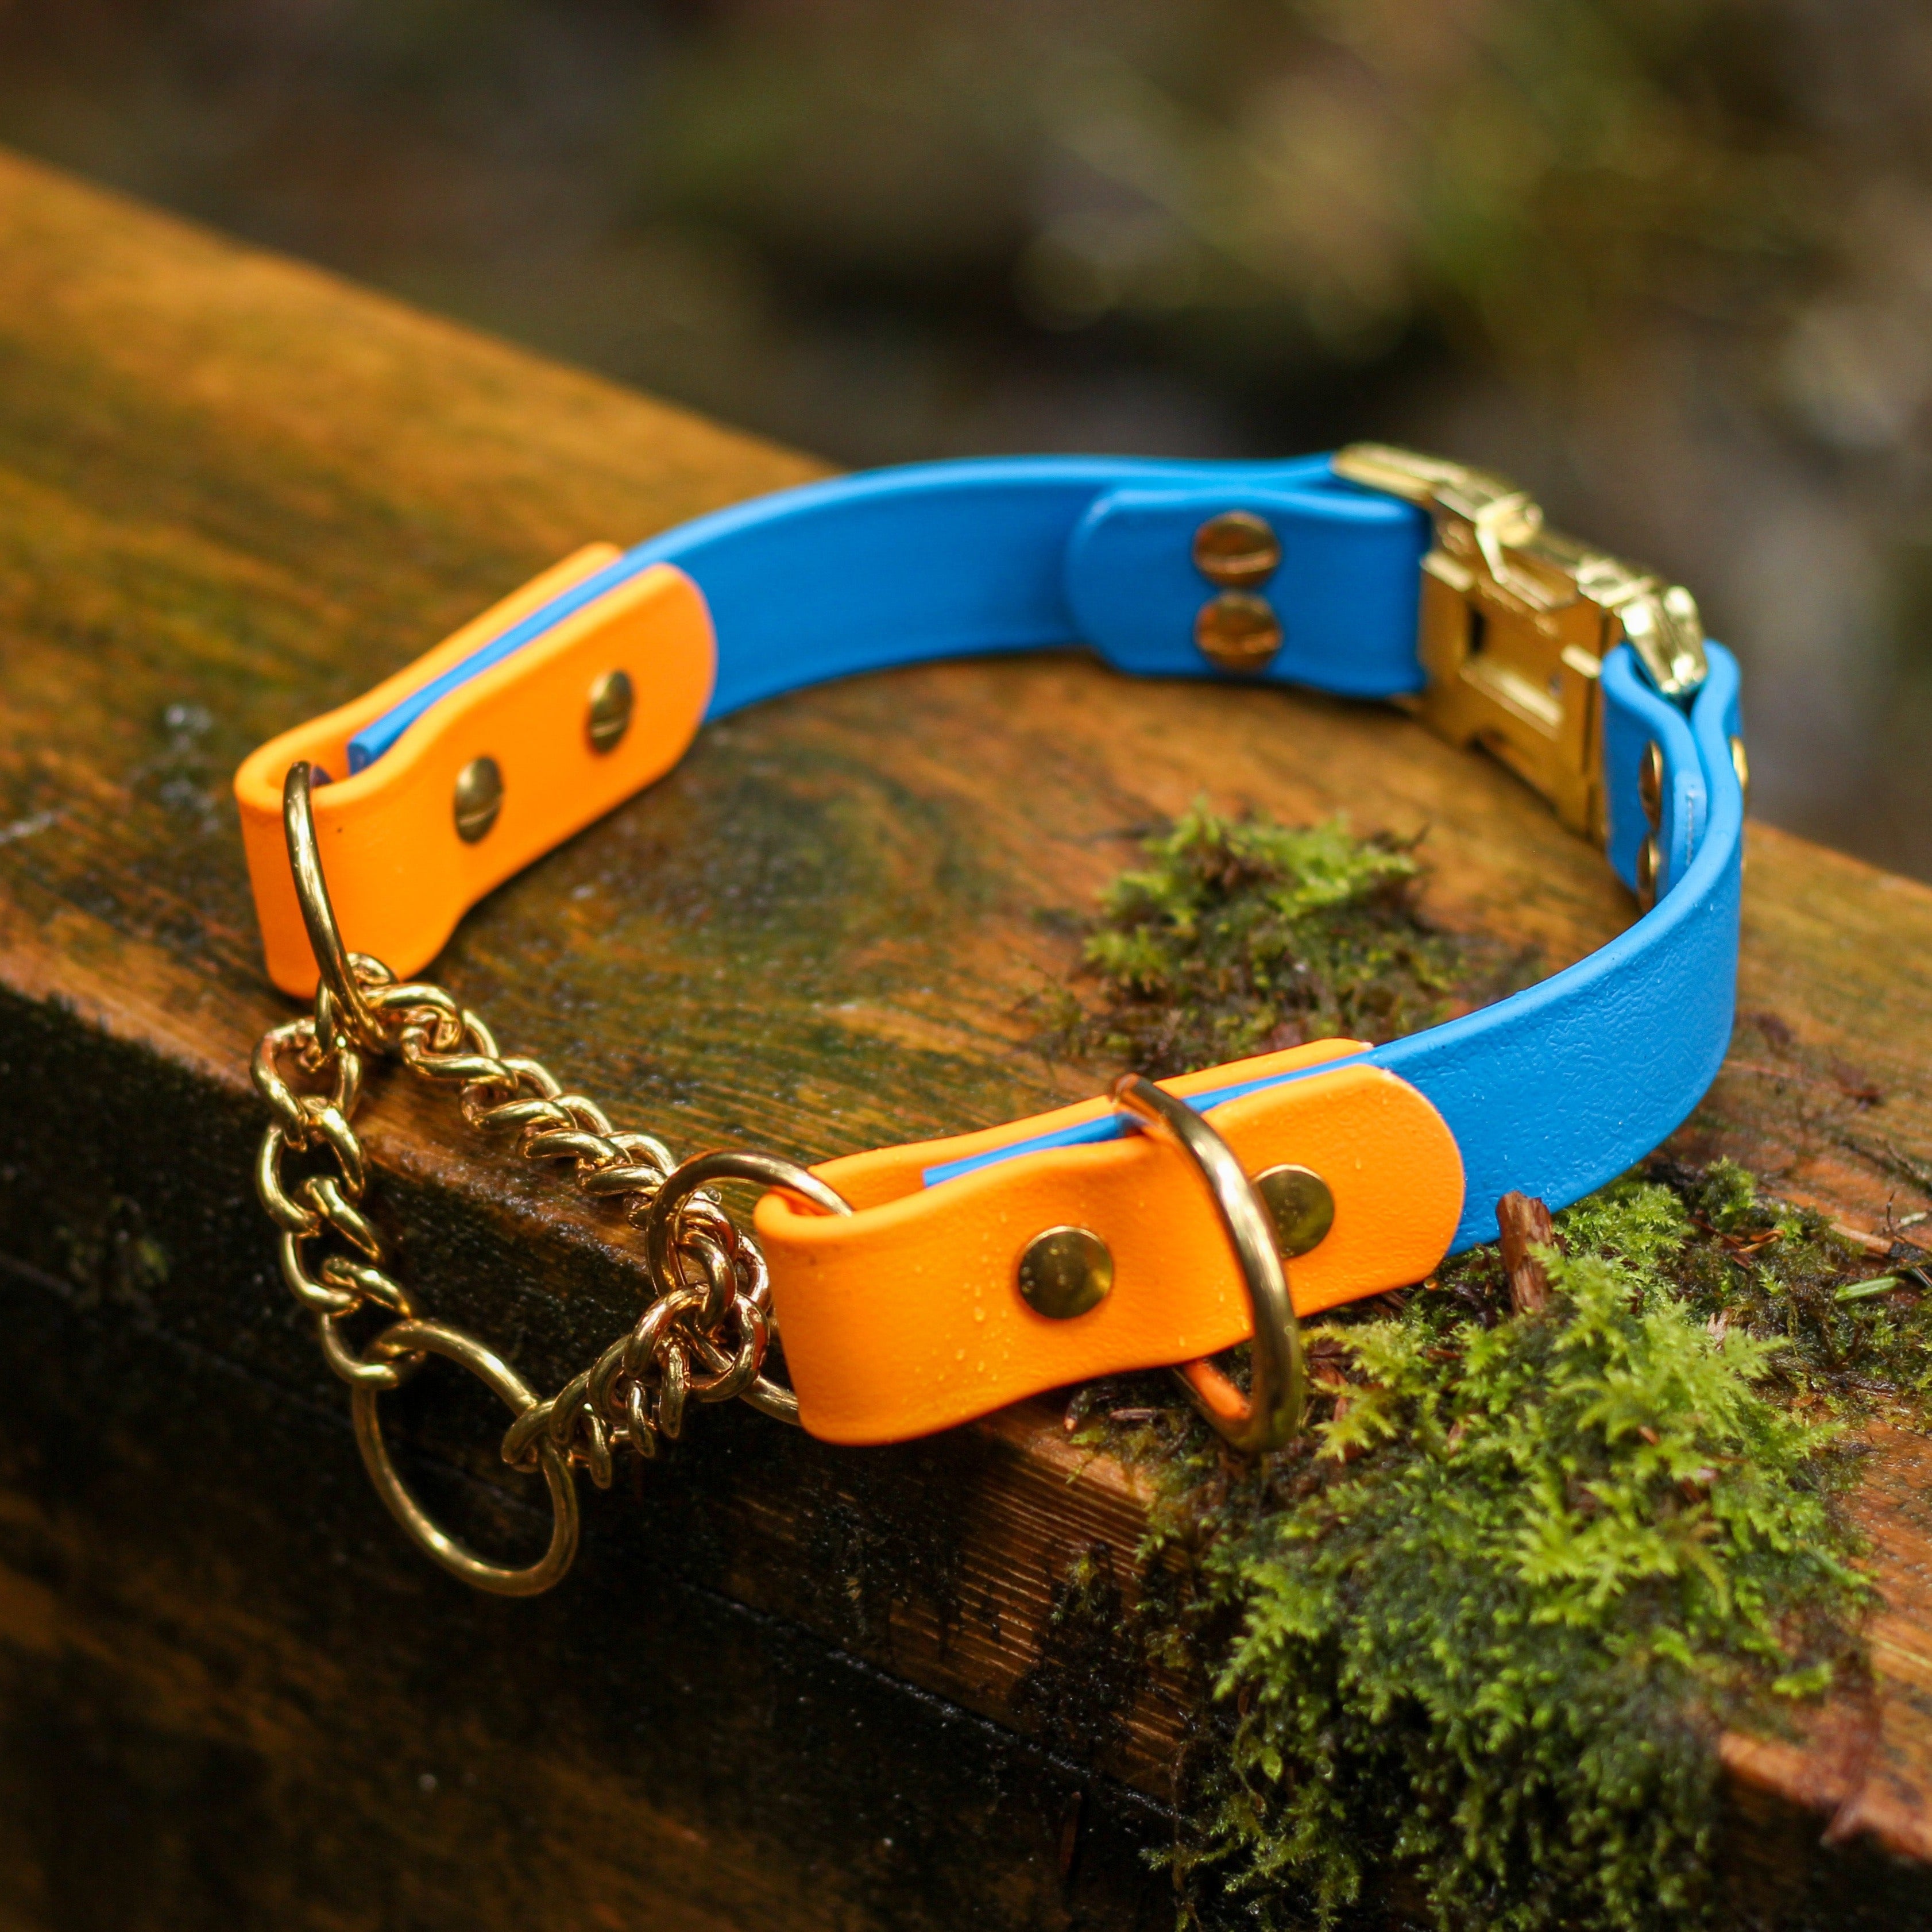 Blue and Orange Waterproof Biothane Martingale Dog Collar with an added on Quick-Release Buckle